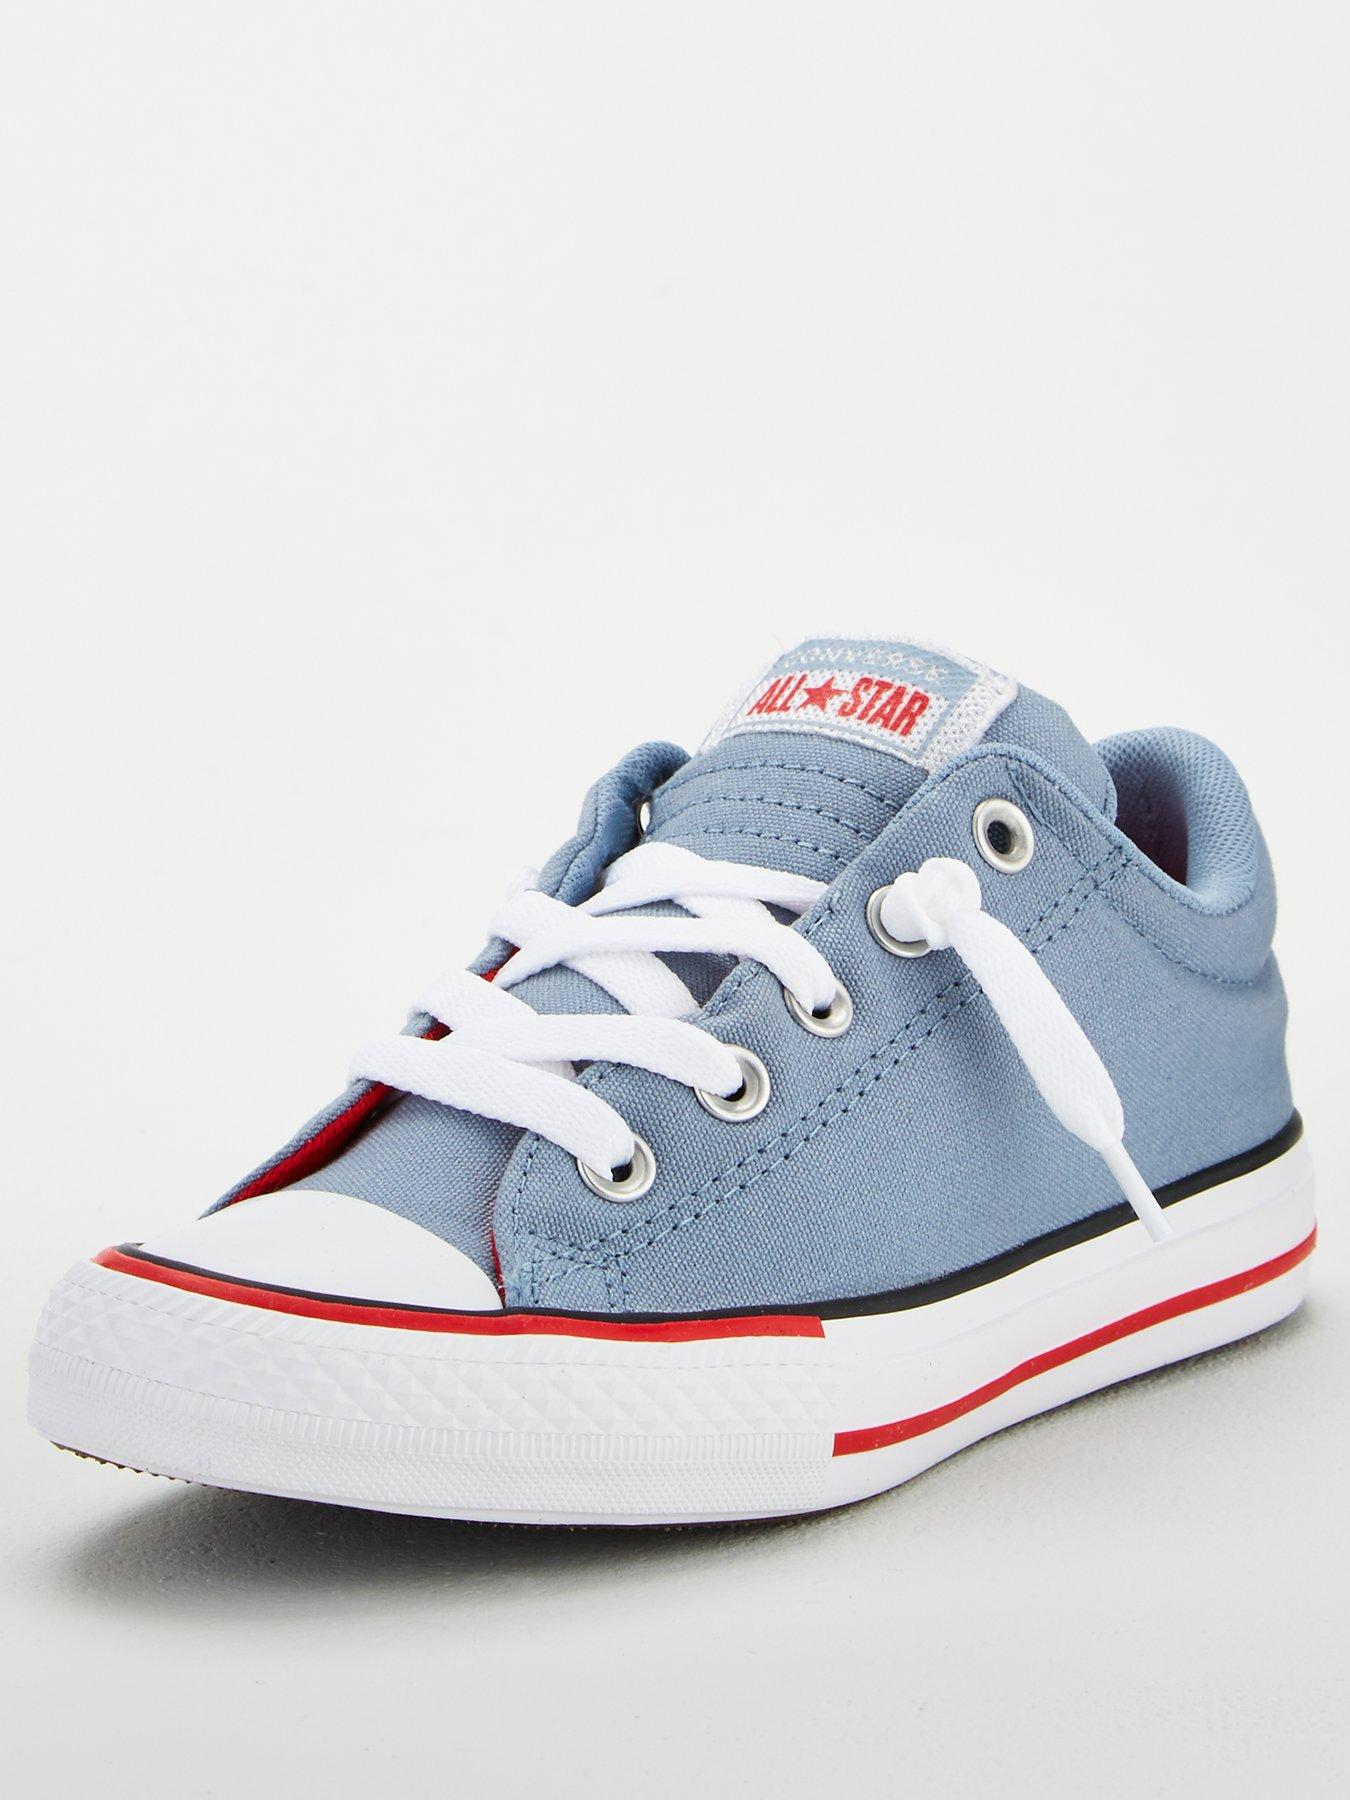 office childrens converse